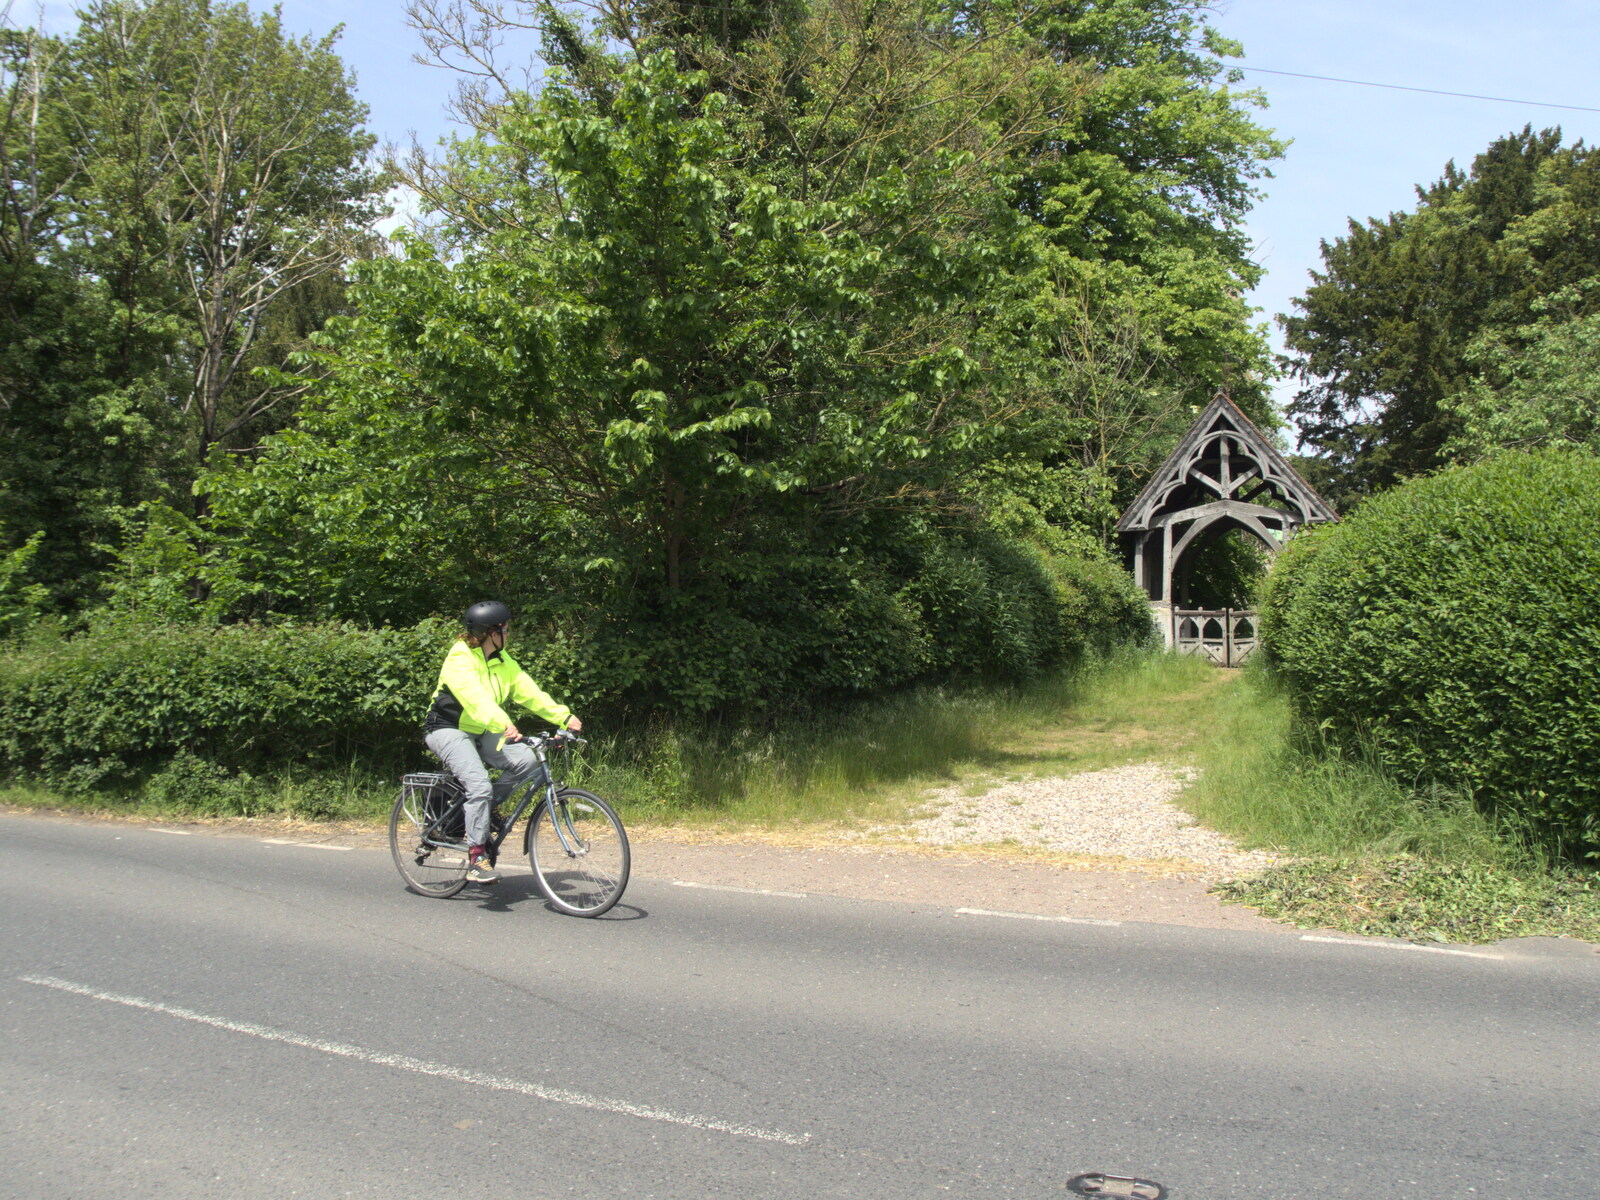 Isobel cycles past the lych gate of Hoxne church from A Quest for the Fabled Swimming Spot, Hoxne, Suffolk - 29th May 2023